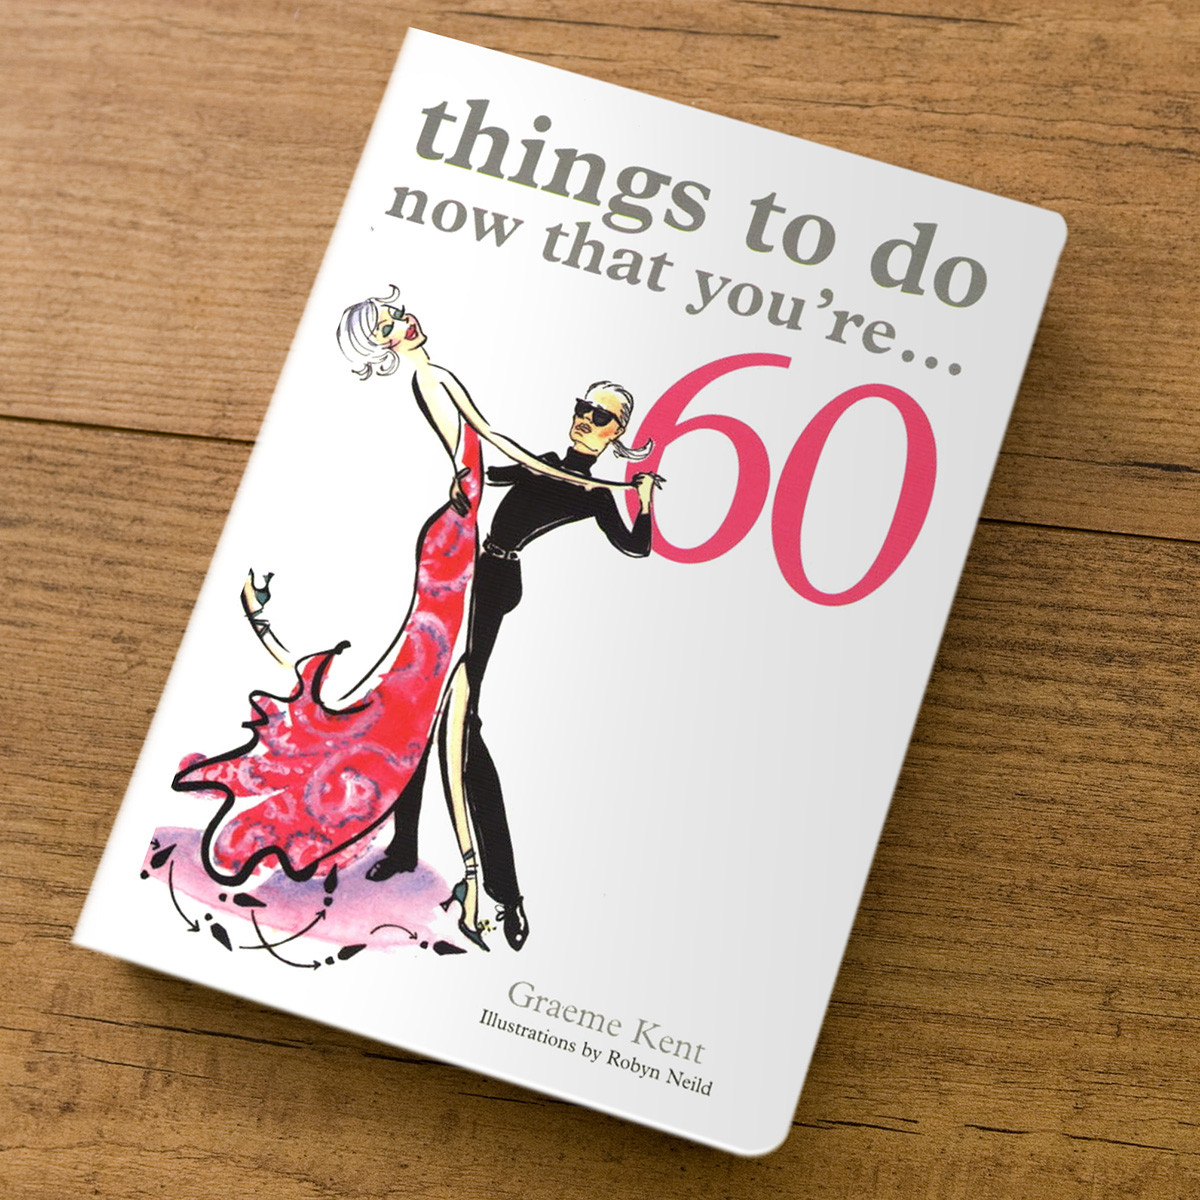 Gifts For 60Th Birthday Male
 Things To Do Now That You re 60 Gift Book 60th